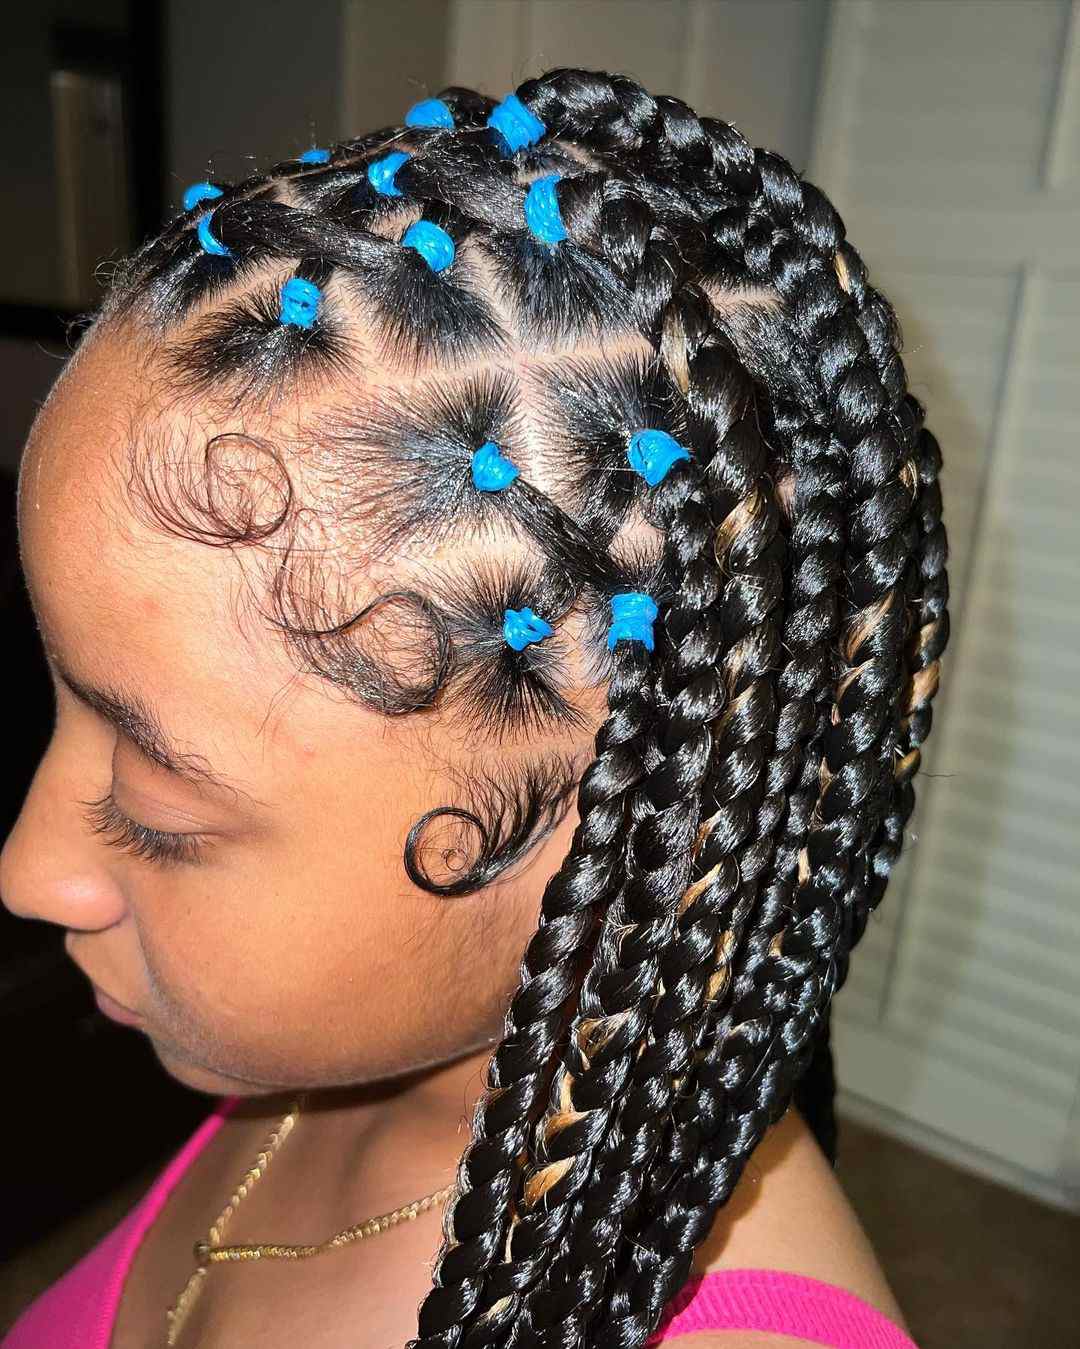 Criss cross braids with rubber bands